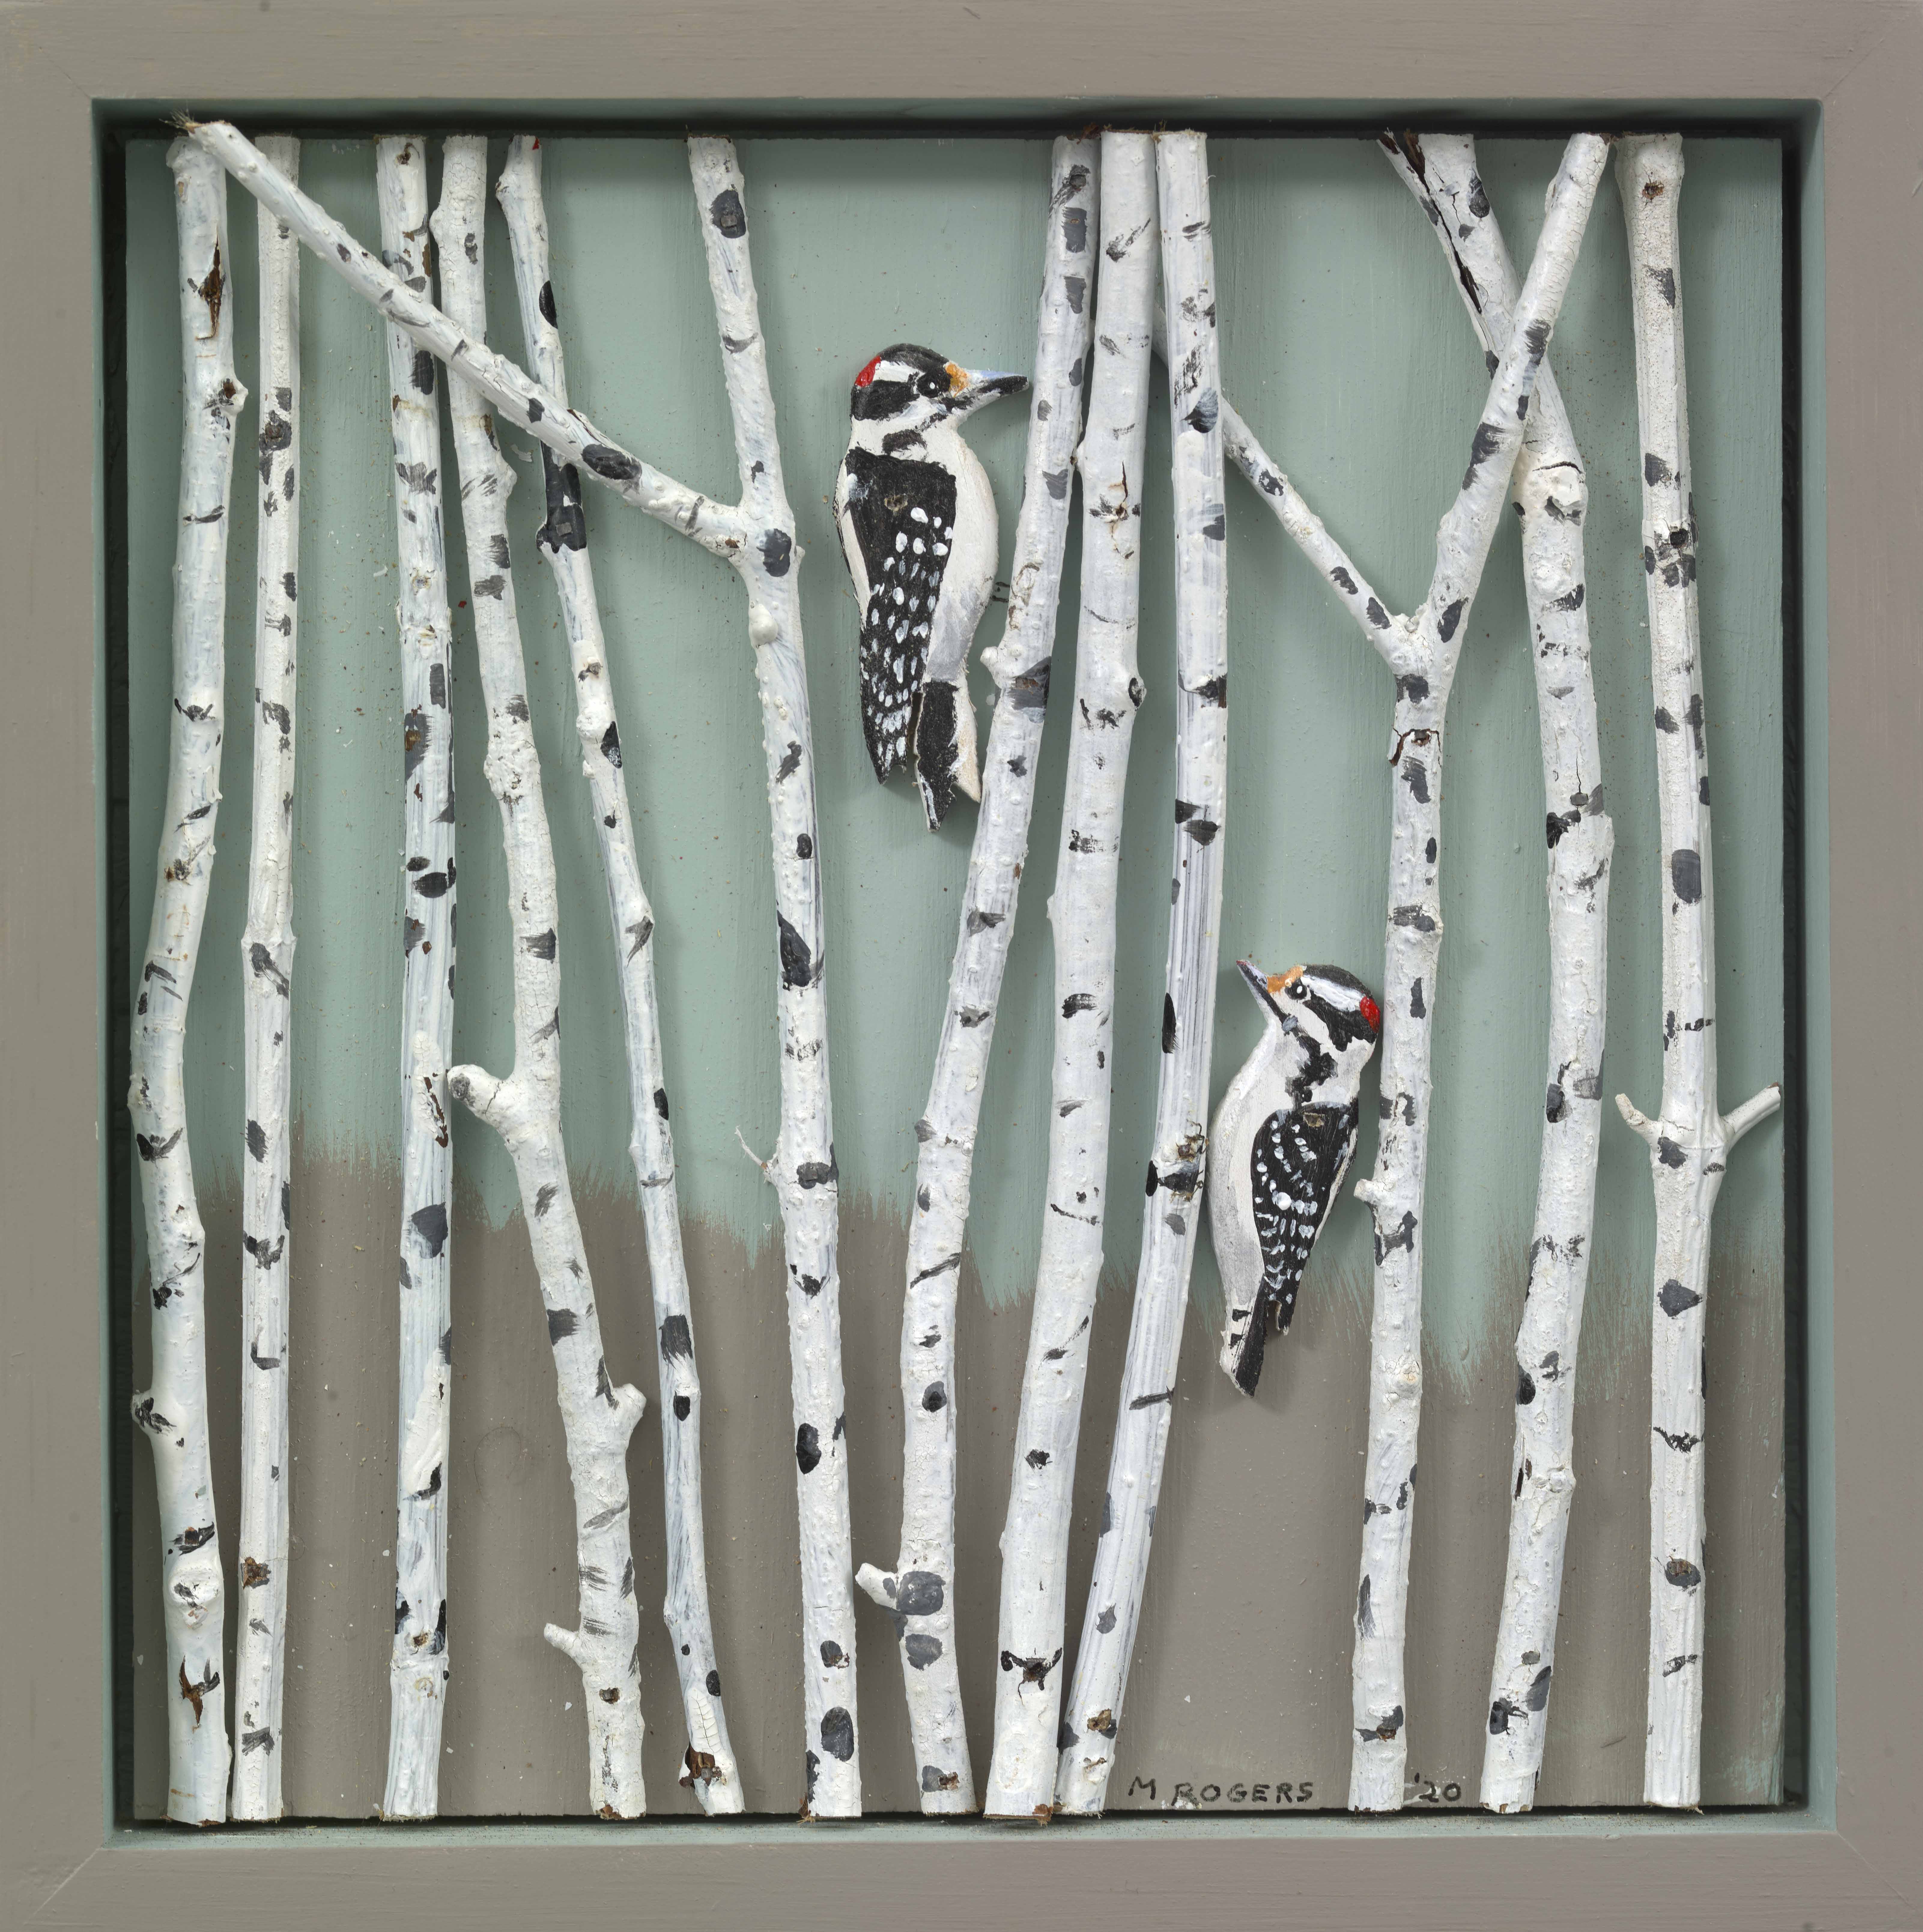 Woodpeckers in Birches, 2020, mixed media, 9.5 x 9.5 inches